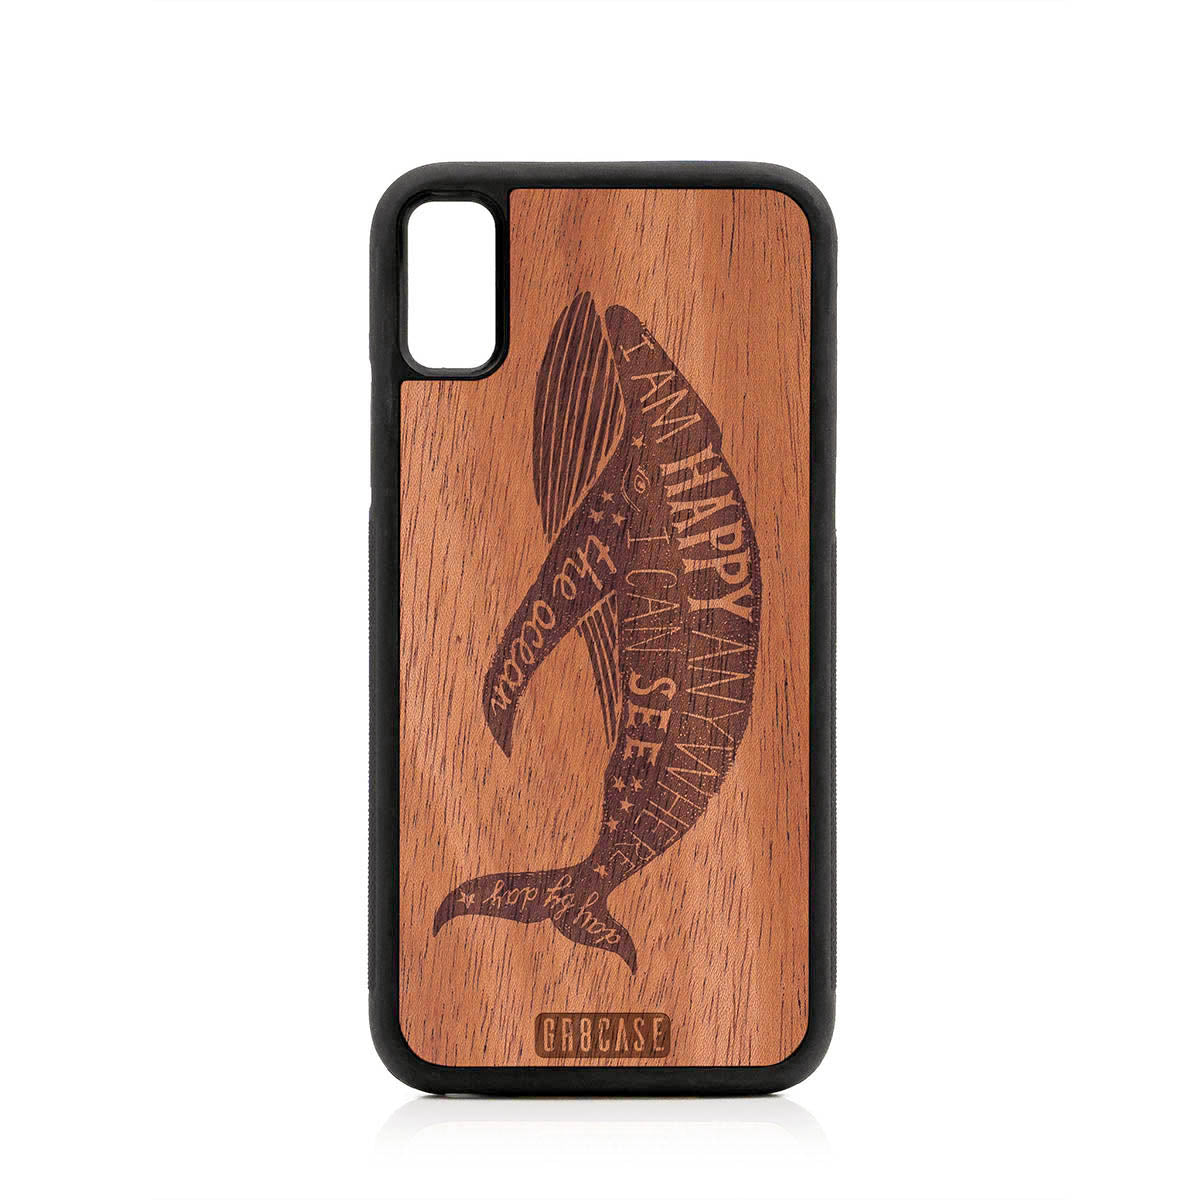 I'm Happy Anywhere I Can See The Ocean (Whale) Design Wood Case For iPhone XS Max